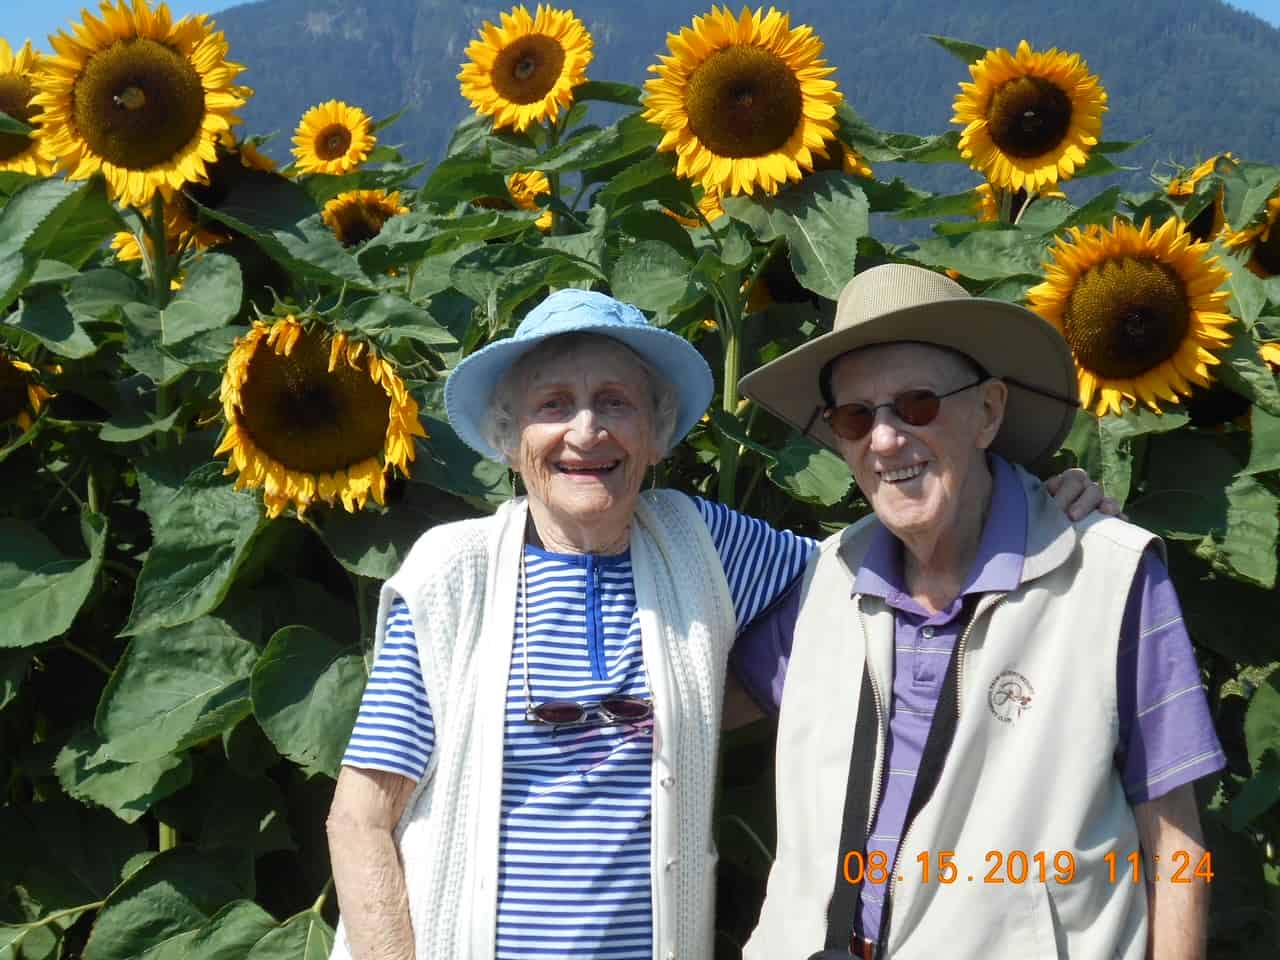 John and Evelyn Bell standing in front of sunflowers.